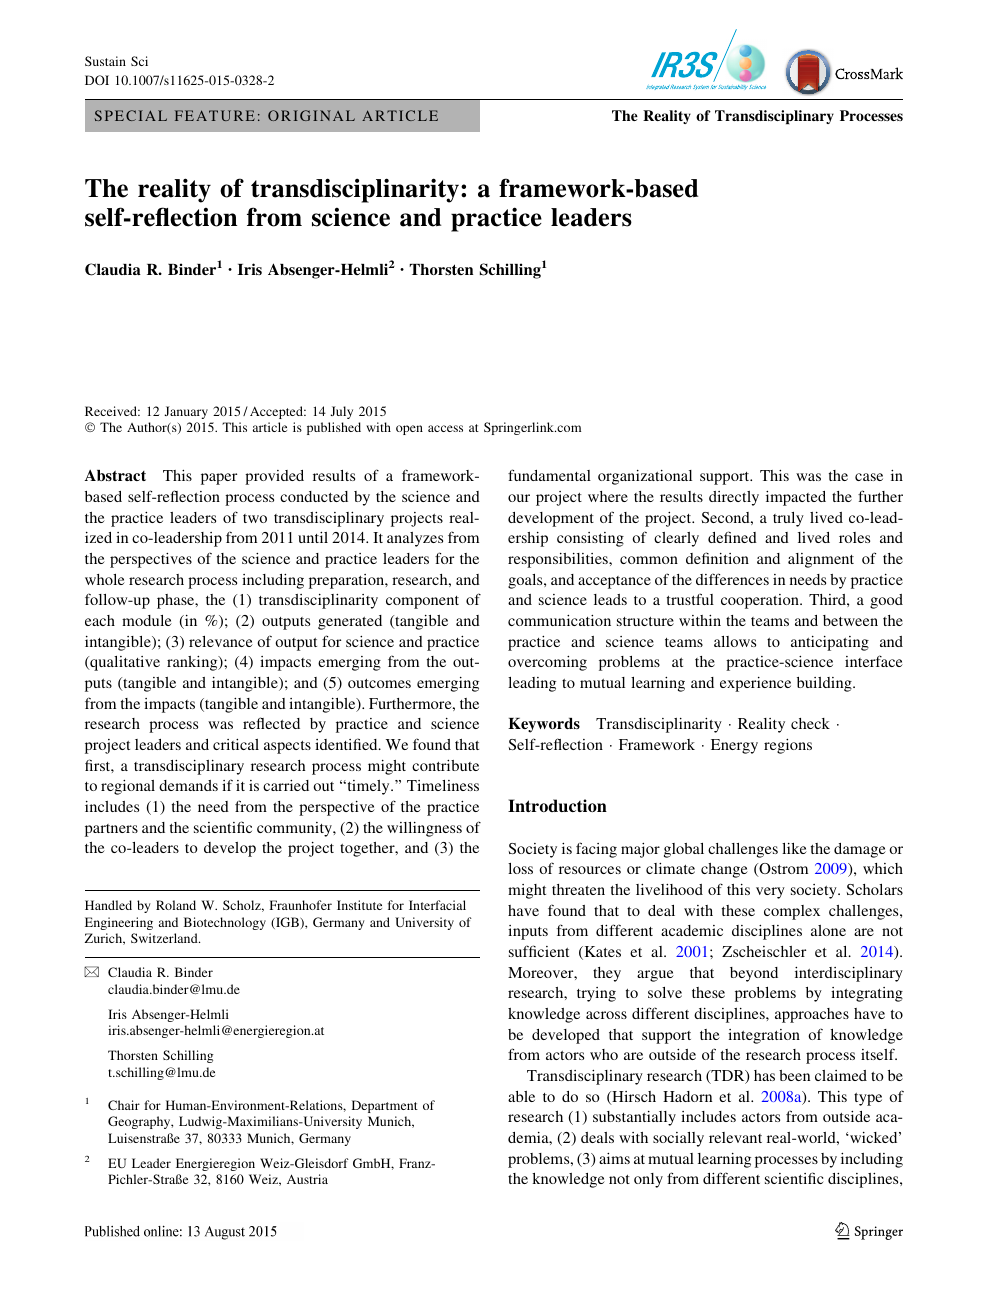 The Reality Of Transdisciplinarity A Framework Based Self Reflection From Science And Practice Leaders Topic Of Research Paper In Earth And Related Environmental Sciences Download Scholarly Article Pdf And Read For Free On